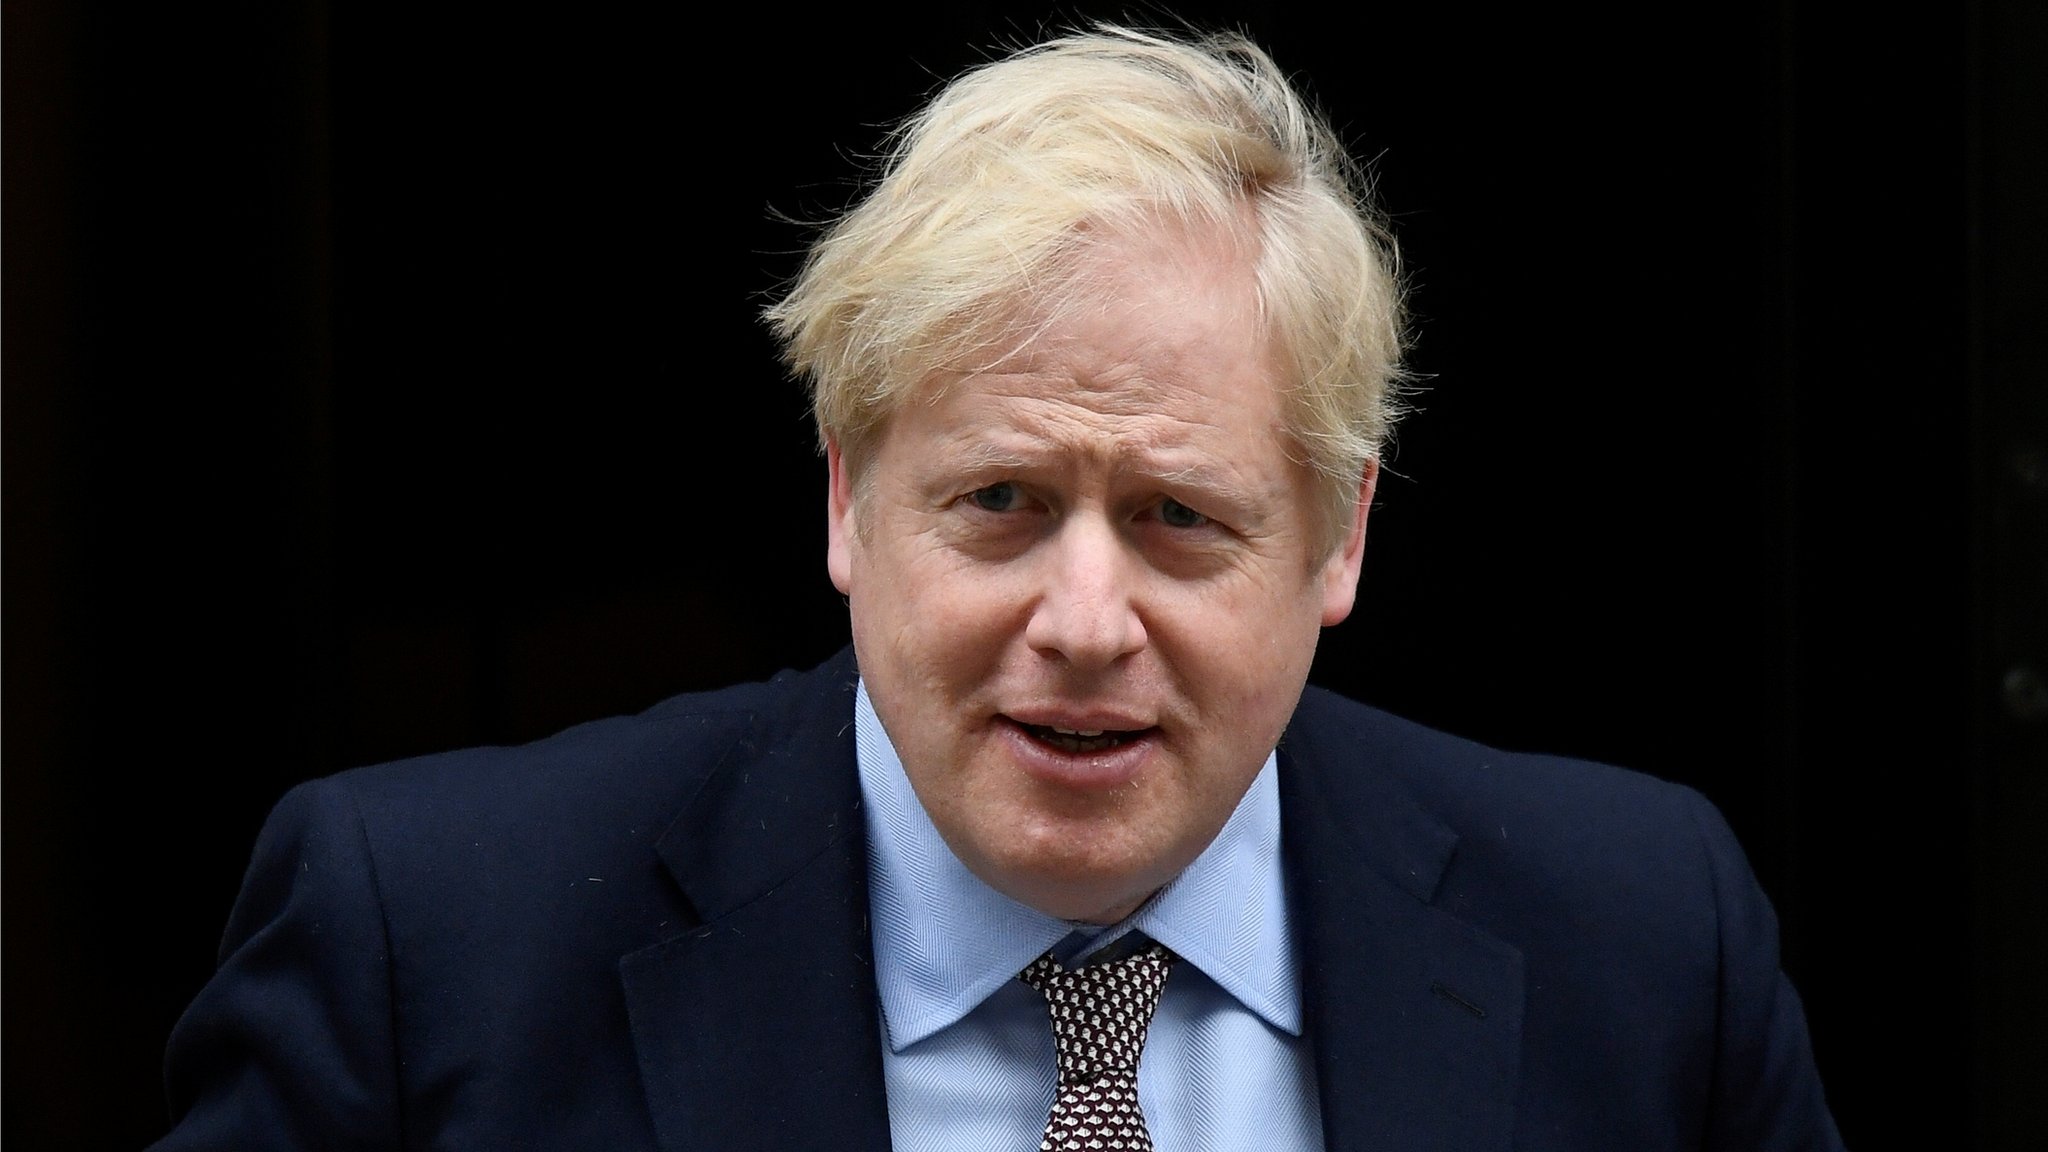 Boris Johnson is kicked to the curb Says Kevin Maguire!